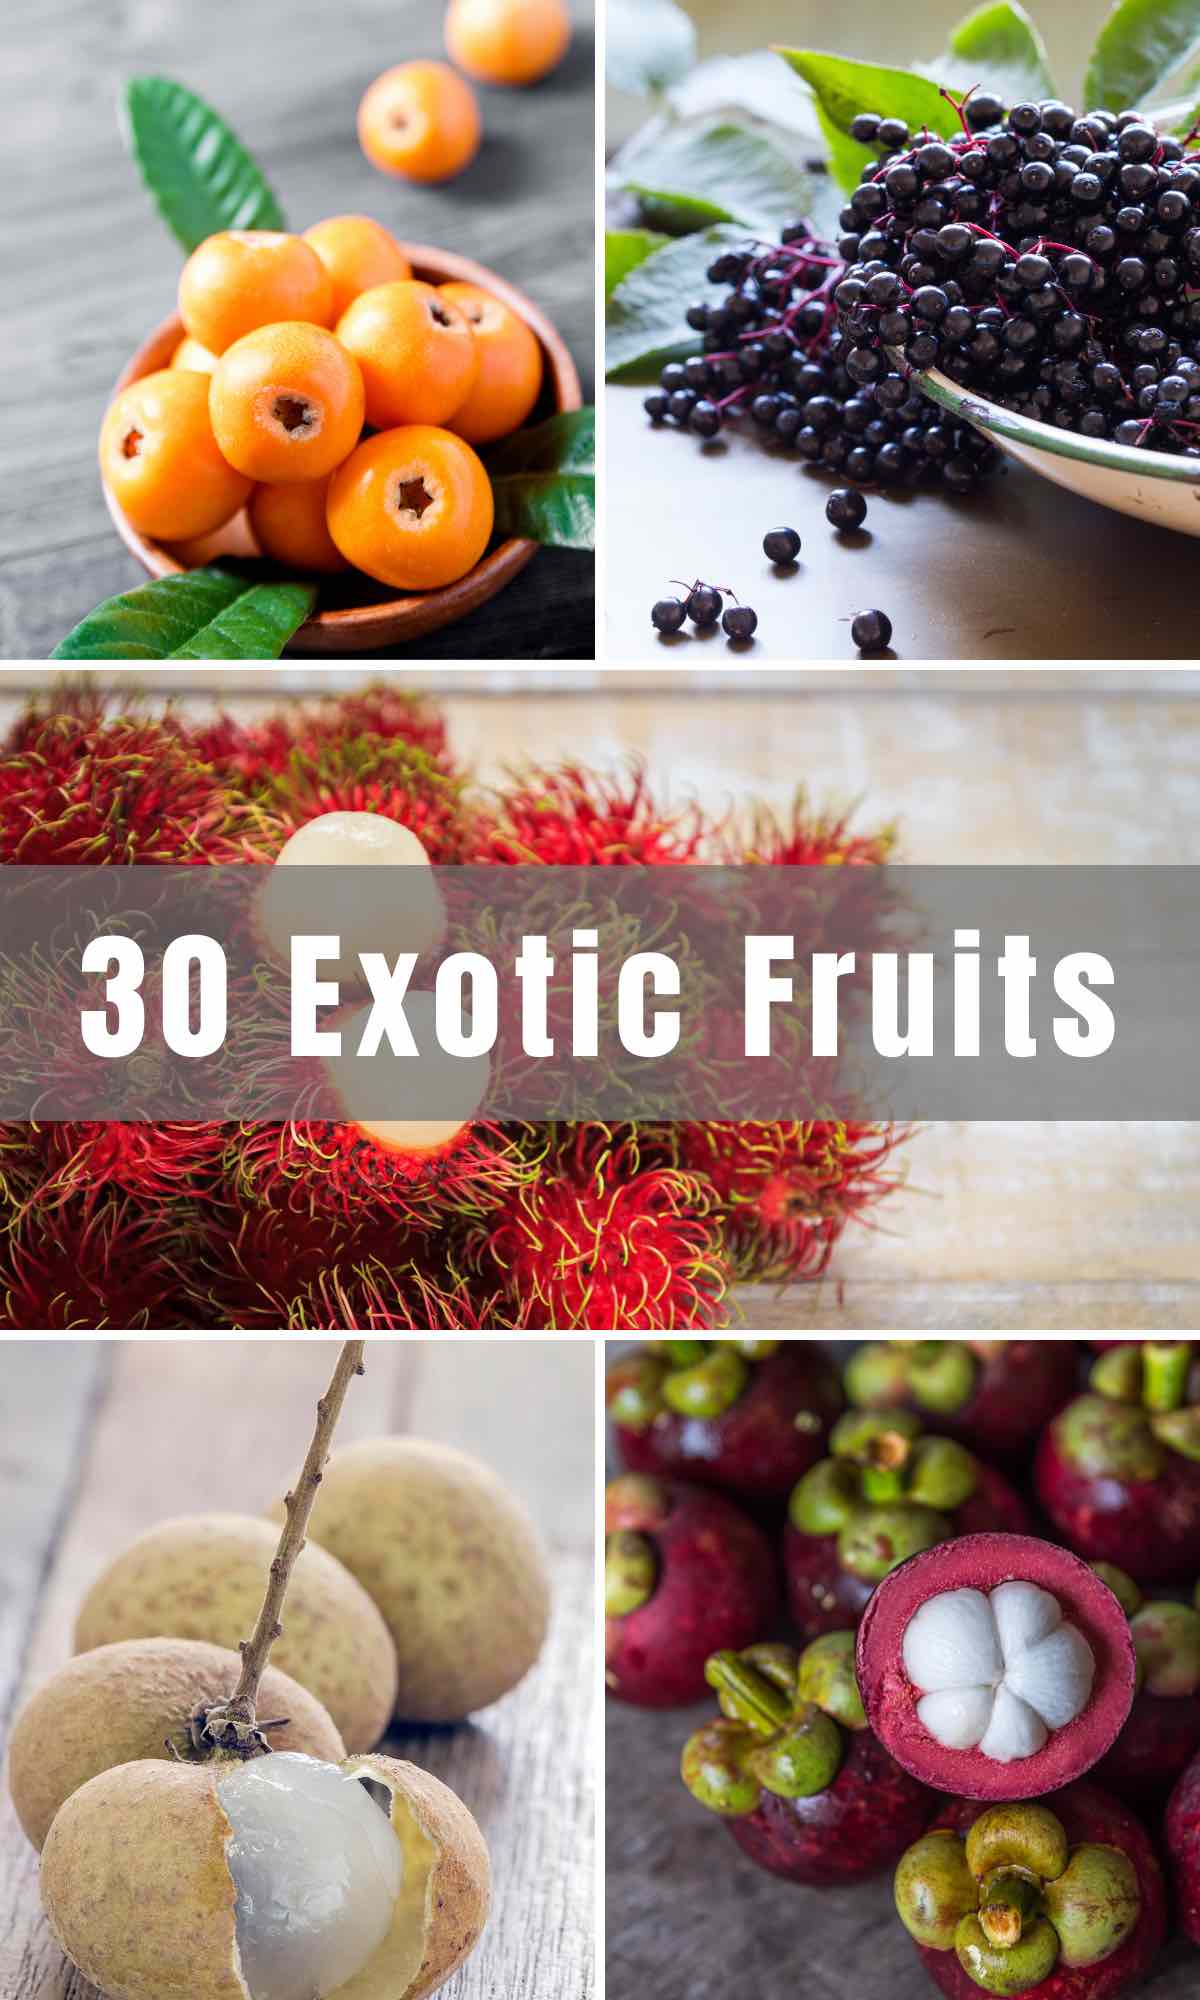 For those who love trying new things, why not venture outside of the norm and try some Exotic Fruits from all over the world? From tropical Caribbean fruits to exotic berries from Asia, there are so many tasty and unique options to try. They’re nutritious with so many health benefits!